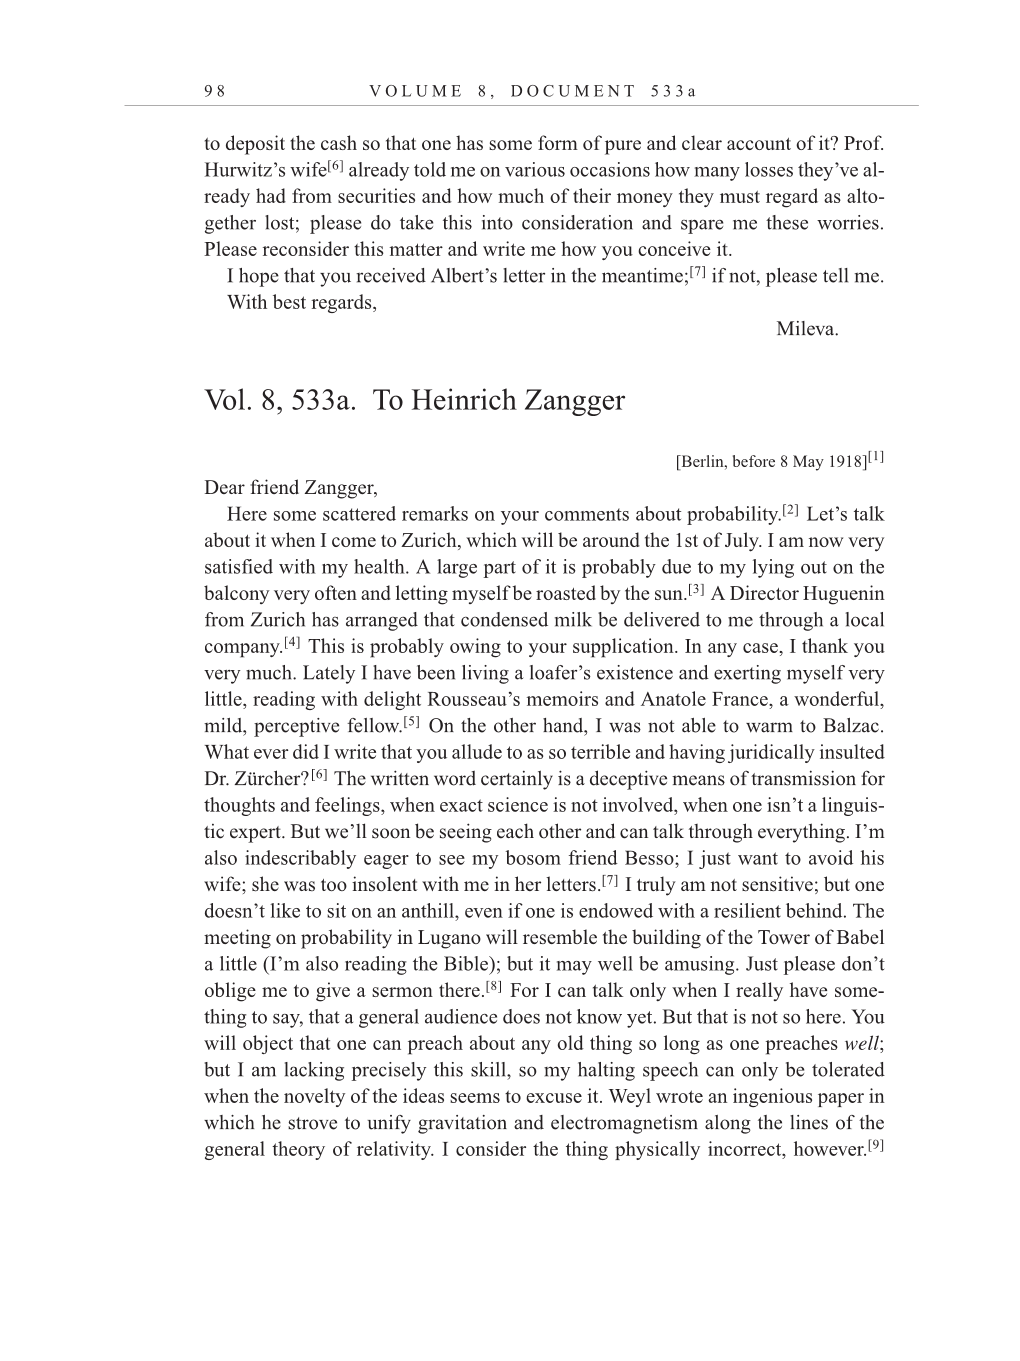 Volume 10: The Berlin Years: Correspondence, May-December 1920, and Supplementary Correspondence, 1909-1920 (English translation supplement) page 98